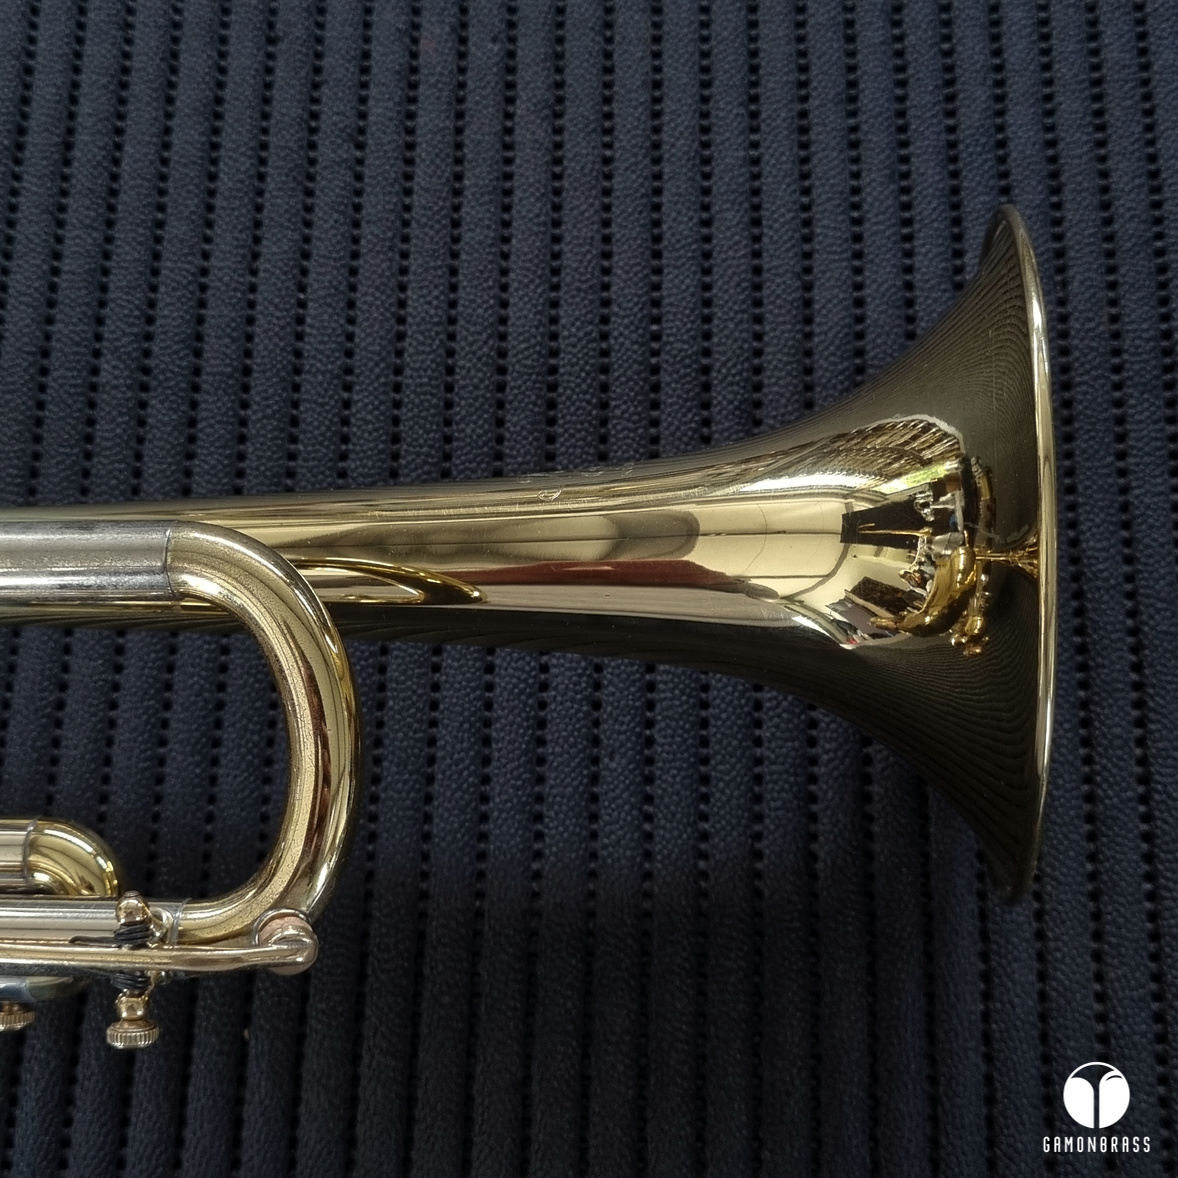 The Martin Committee LARGE BORE trumpet